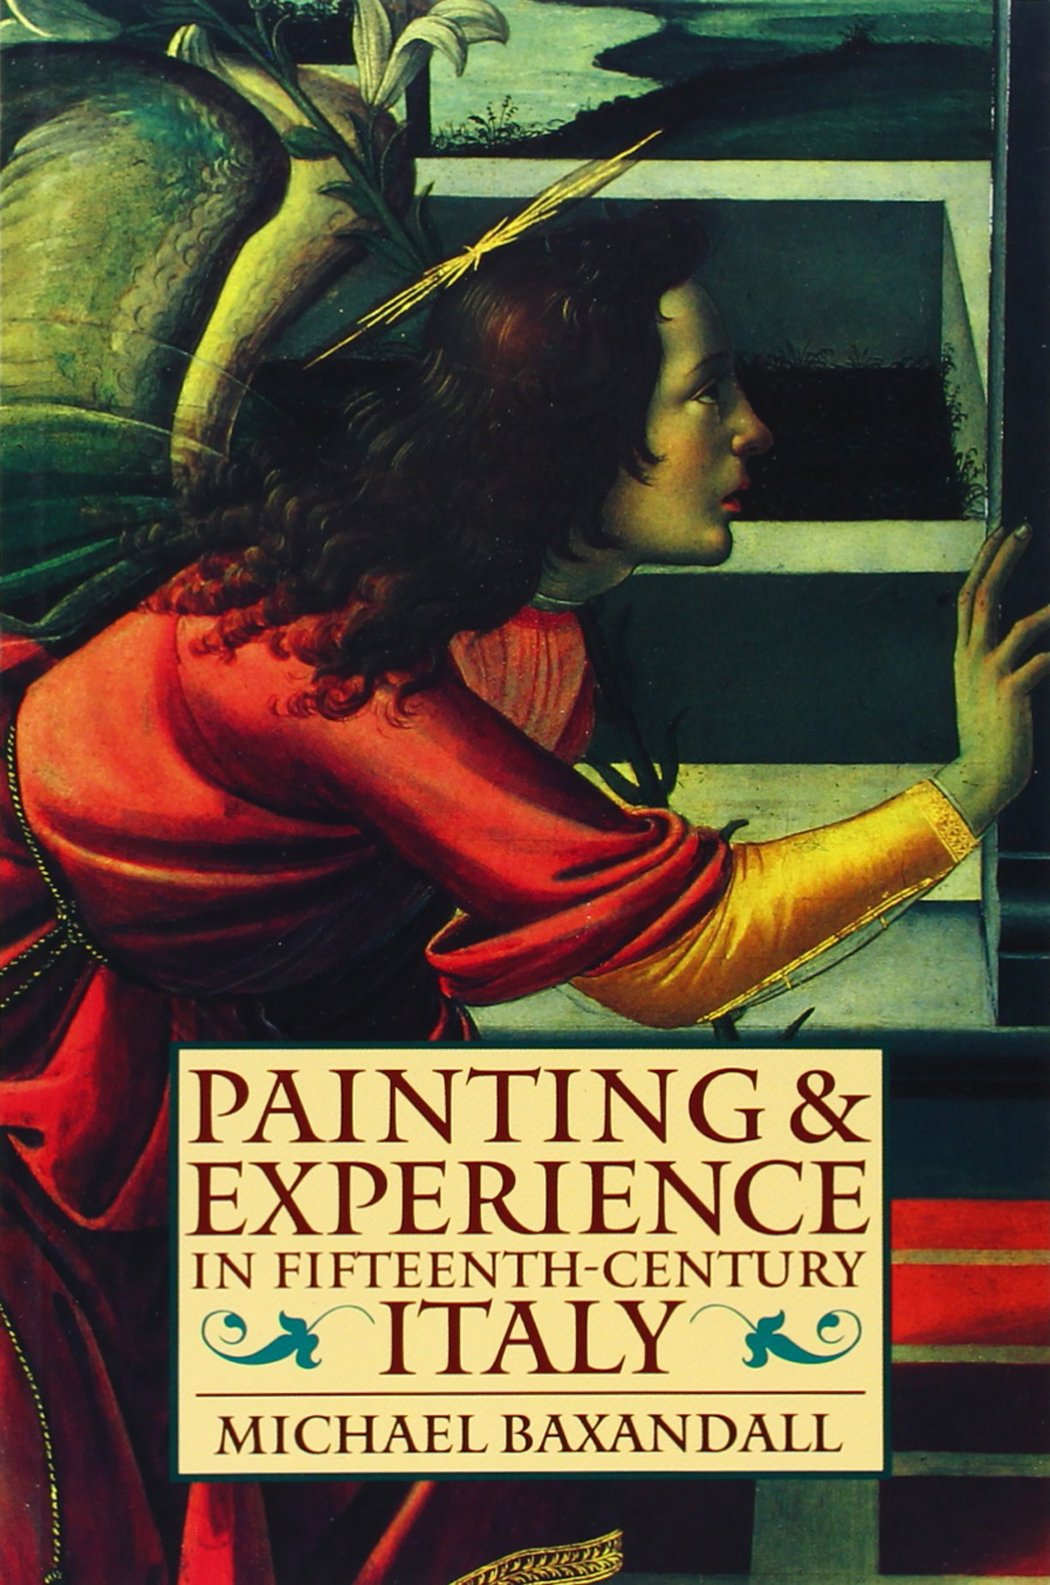 Painting and Experience in 15th Century Italy